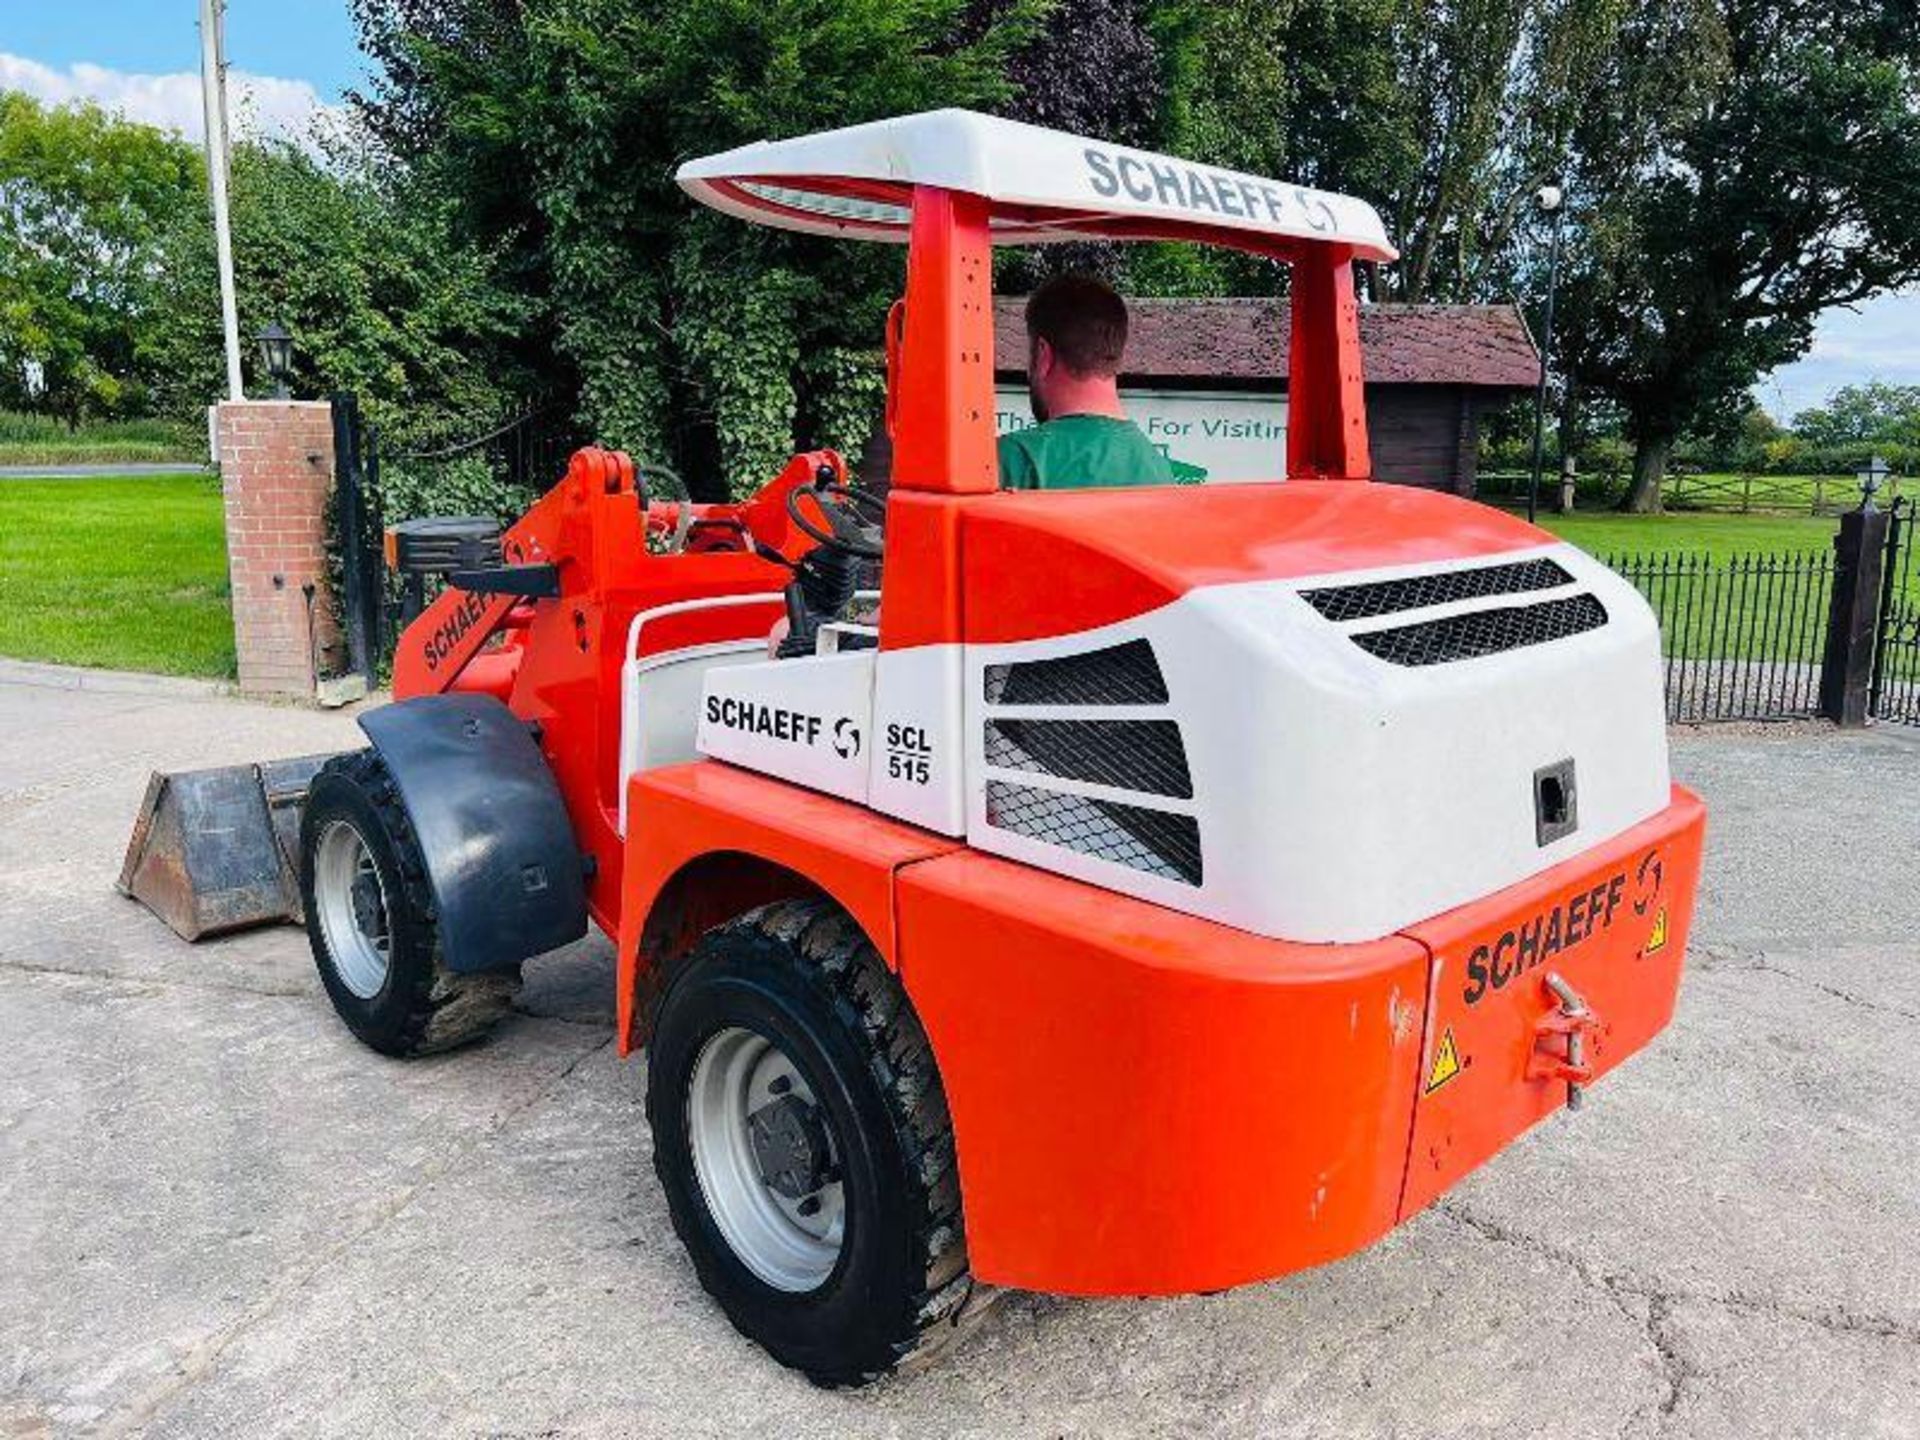 SCHAEFF SCL515 4WD LOADING SHOVEL C/W CANOPY AND ROLE FRAME - Image 2 of 16